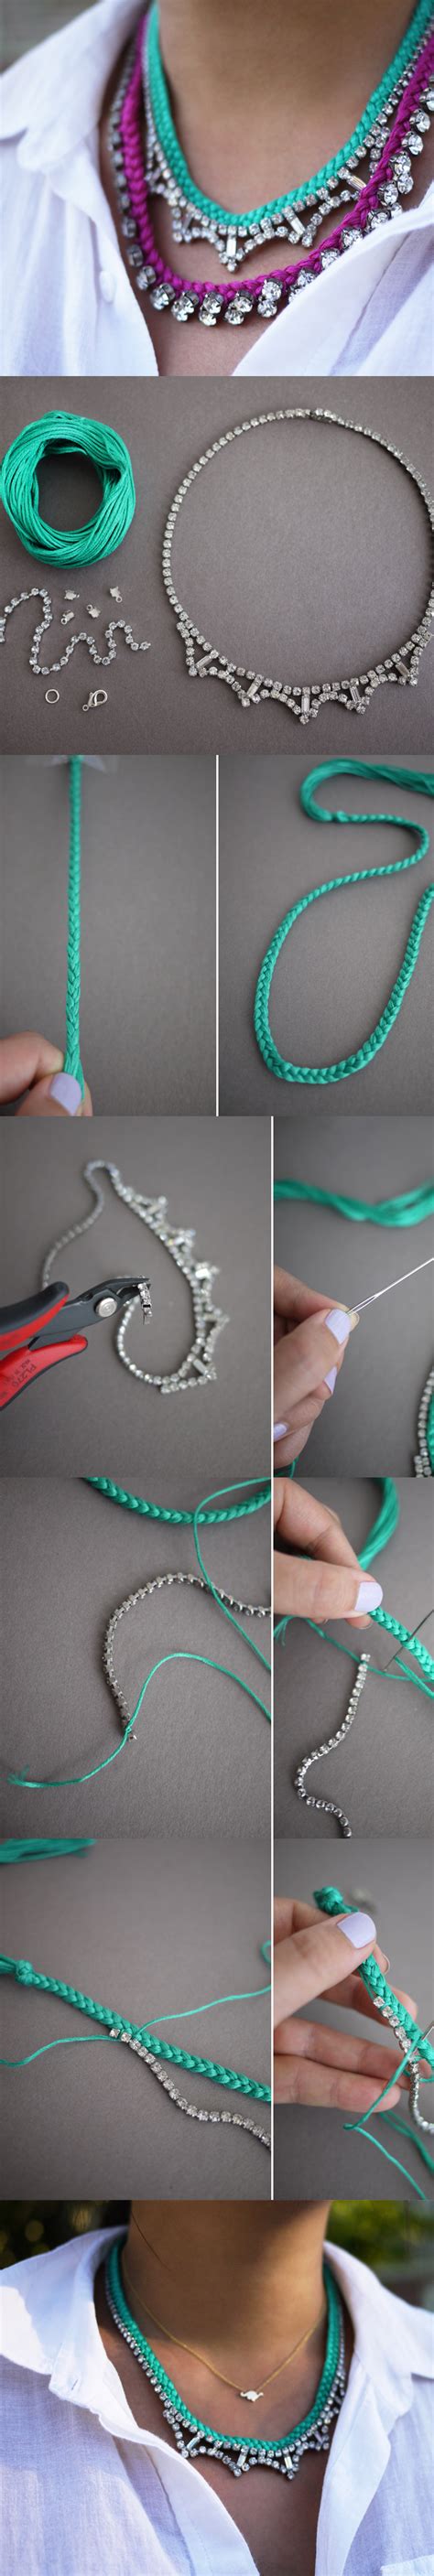 Diy Braided Rhinestone Necklace Pictures Photos And Images For